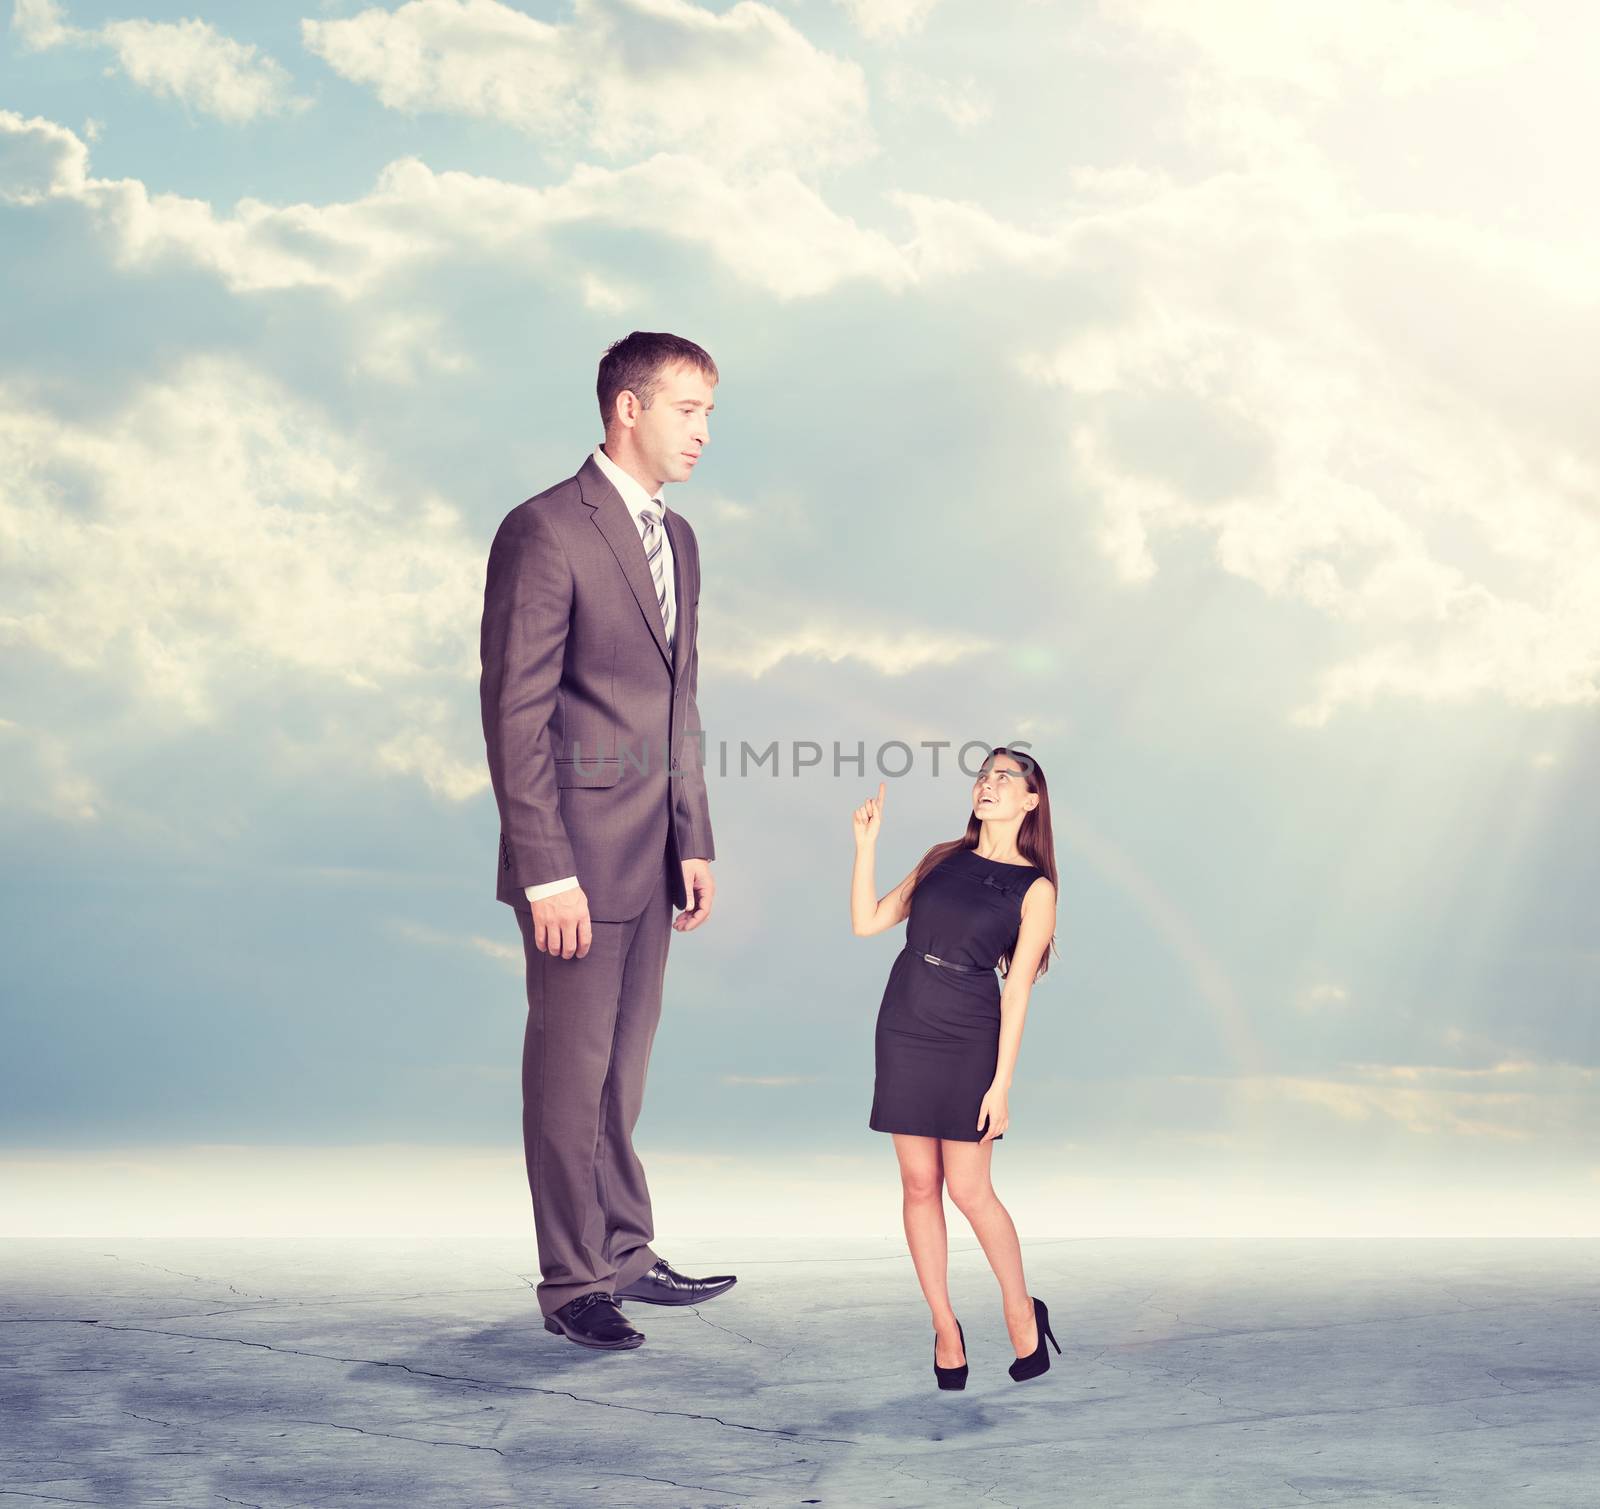 High businessman looking down at little woman in dress. Clouds and cement surface as background. Business concept